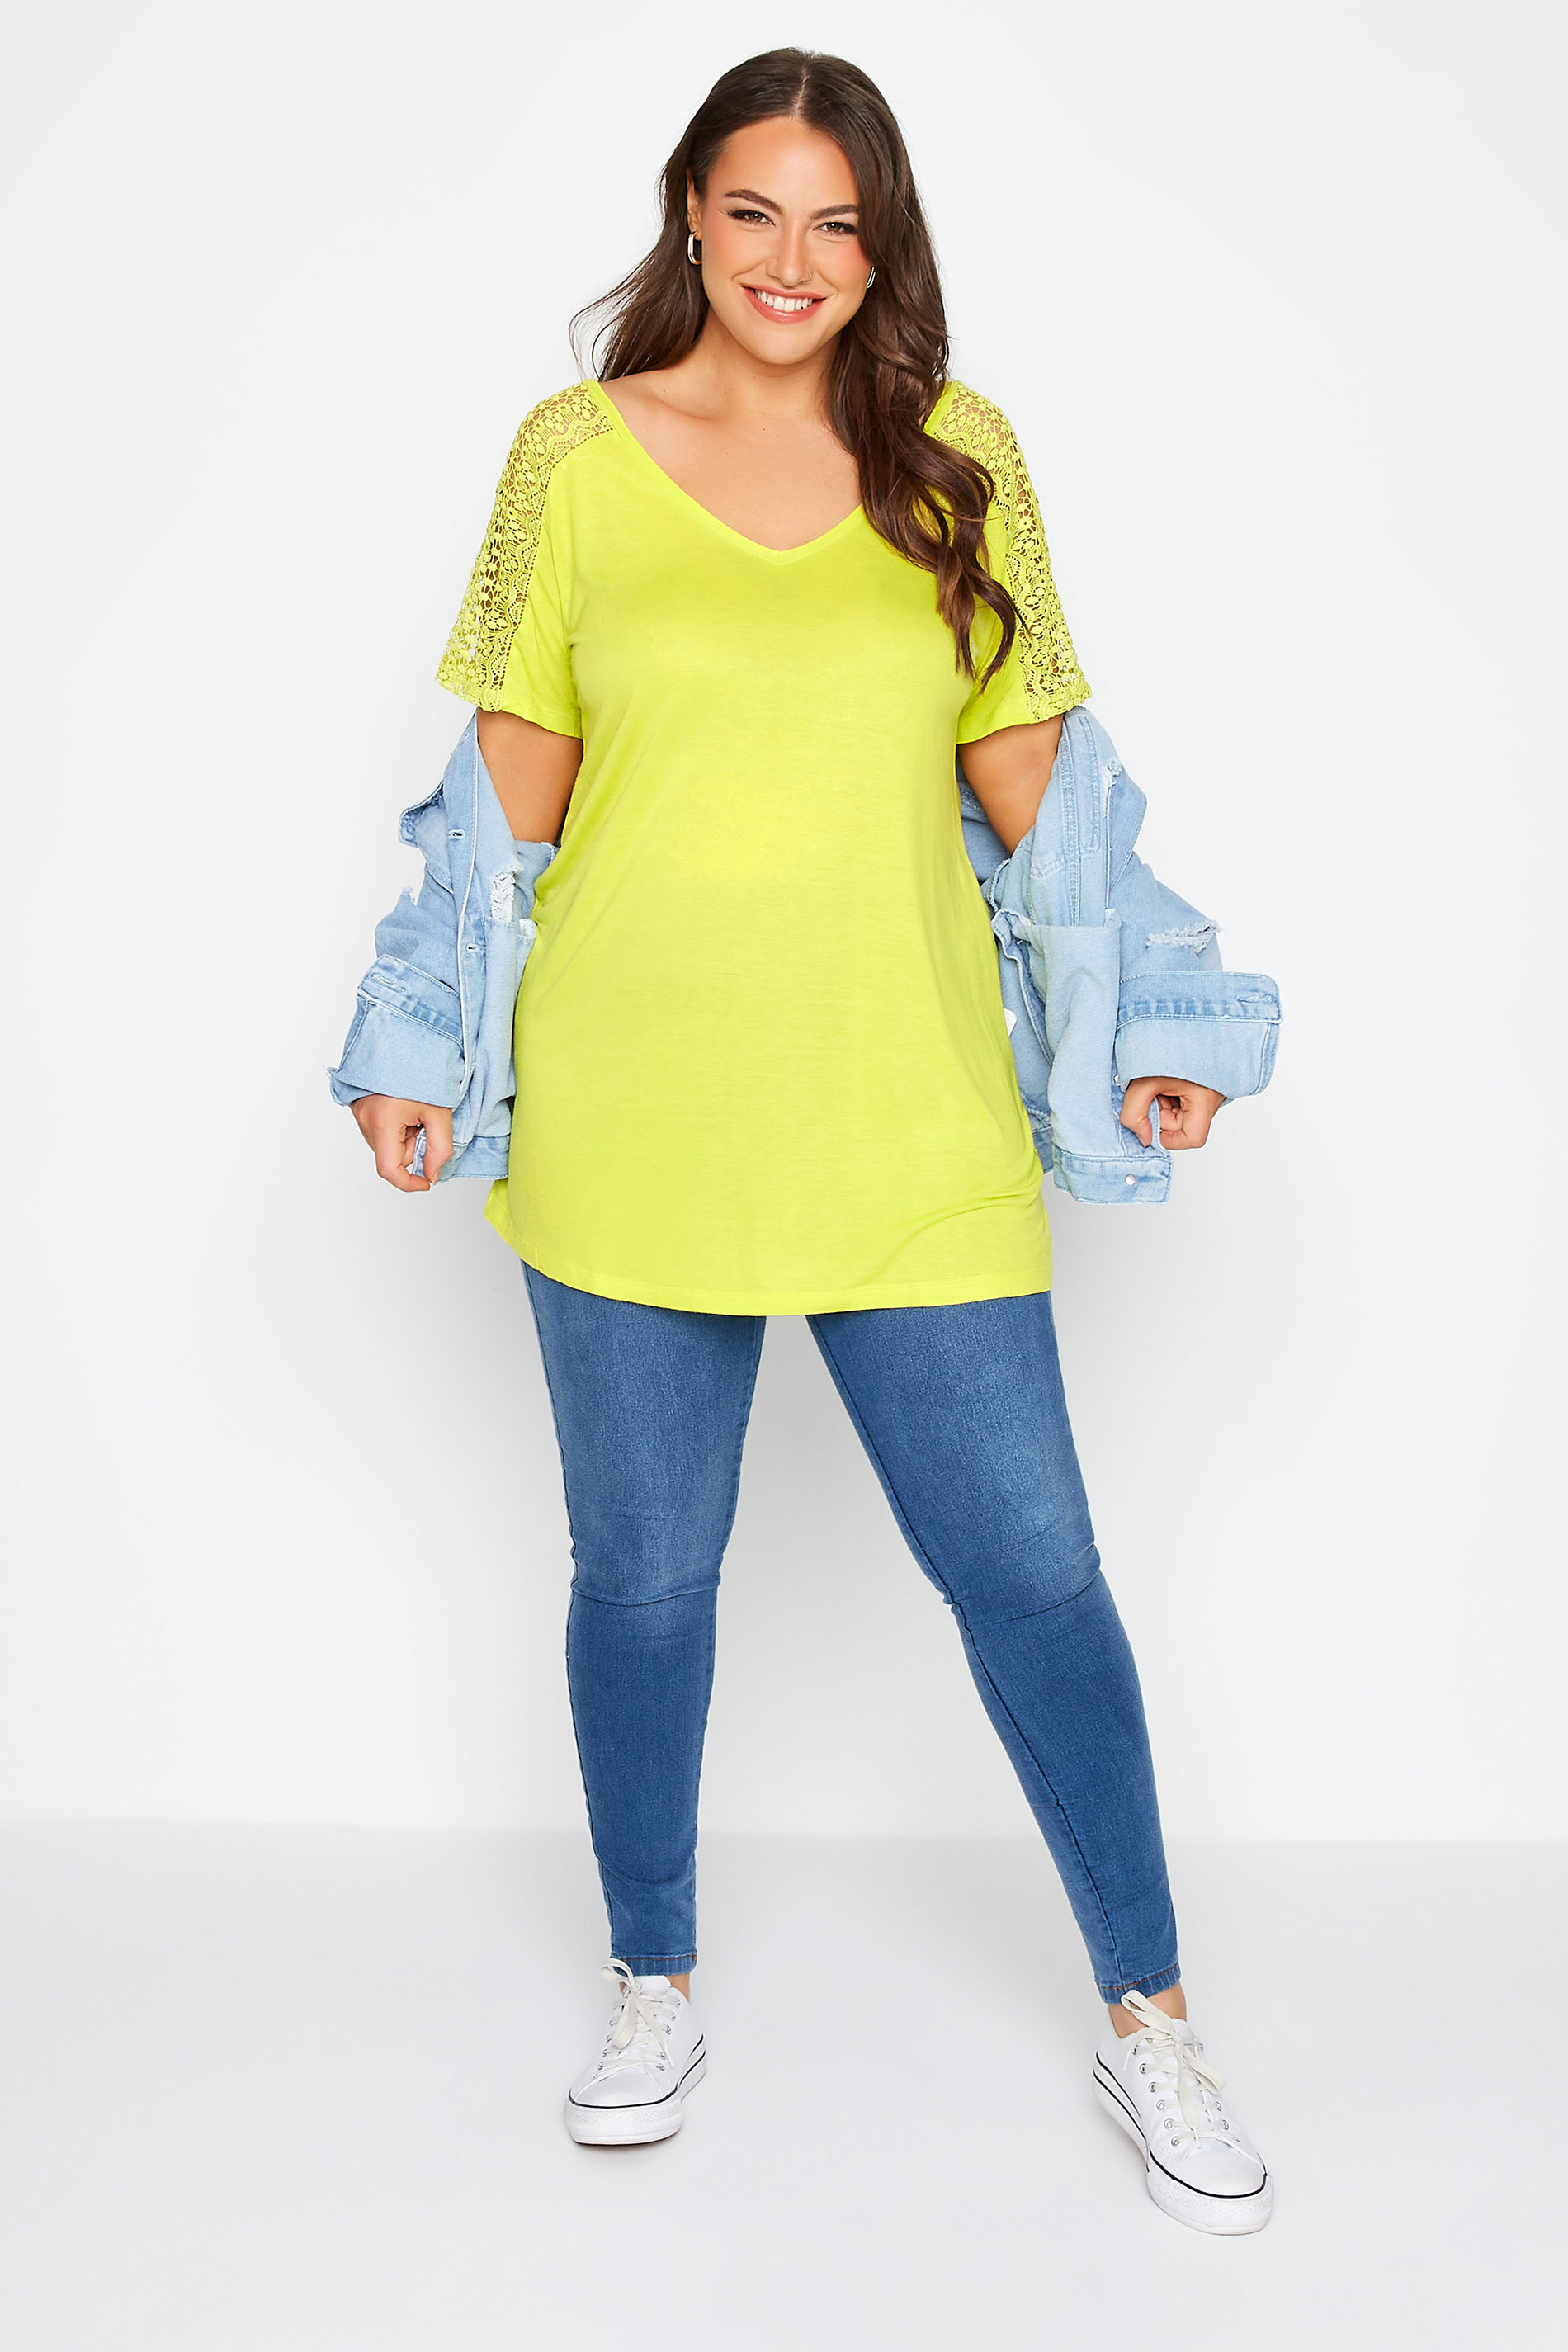 Grande taille  Tops Grande taille  T-Shirts | T-Shirt Vert Citron Manches Dentelle - YL41046